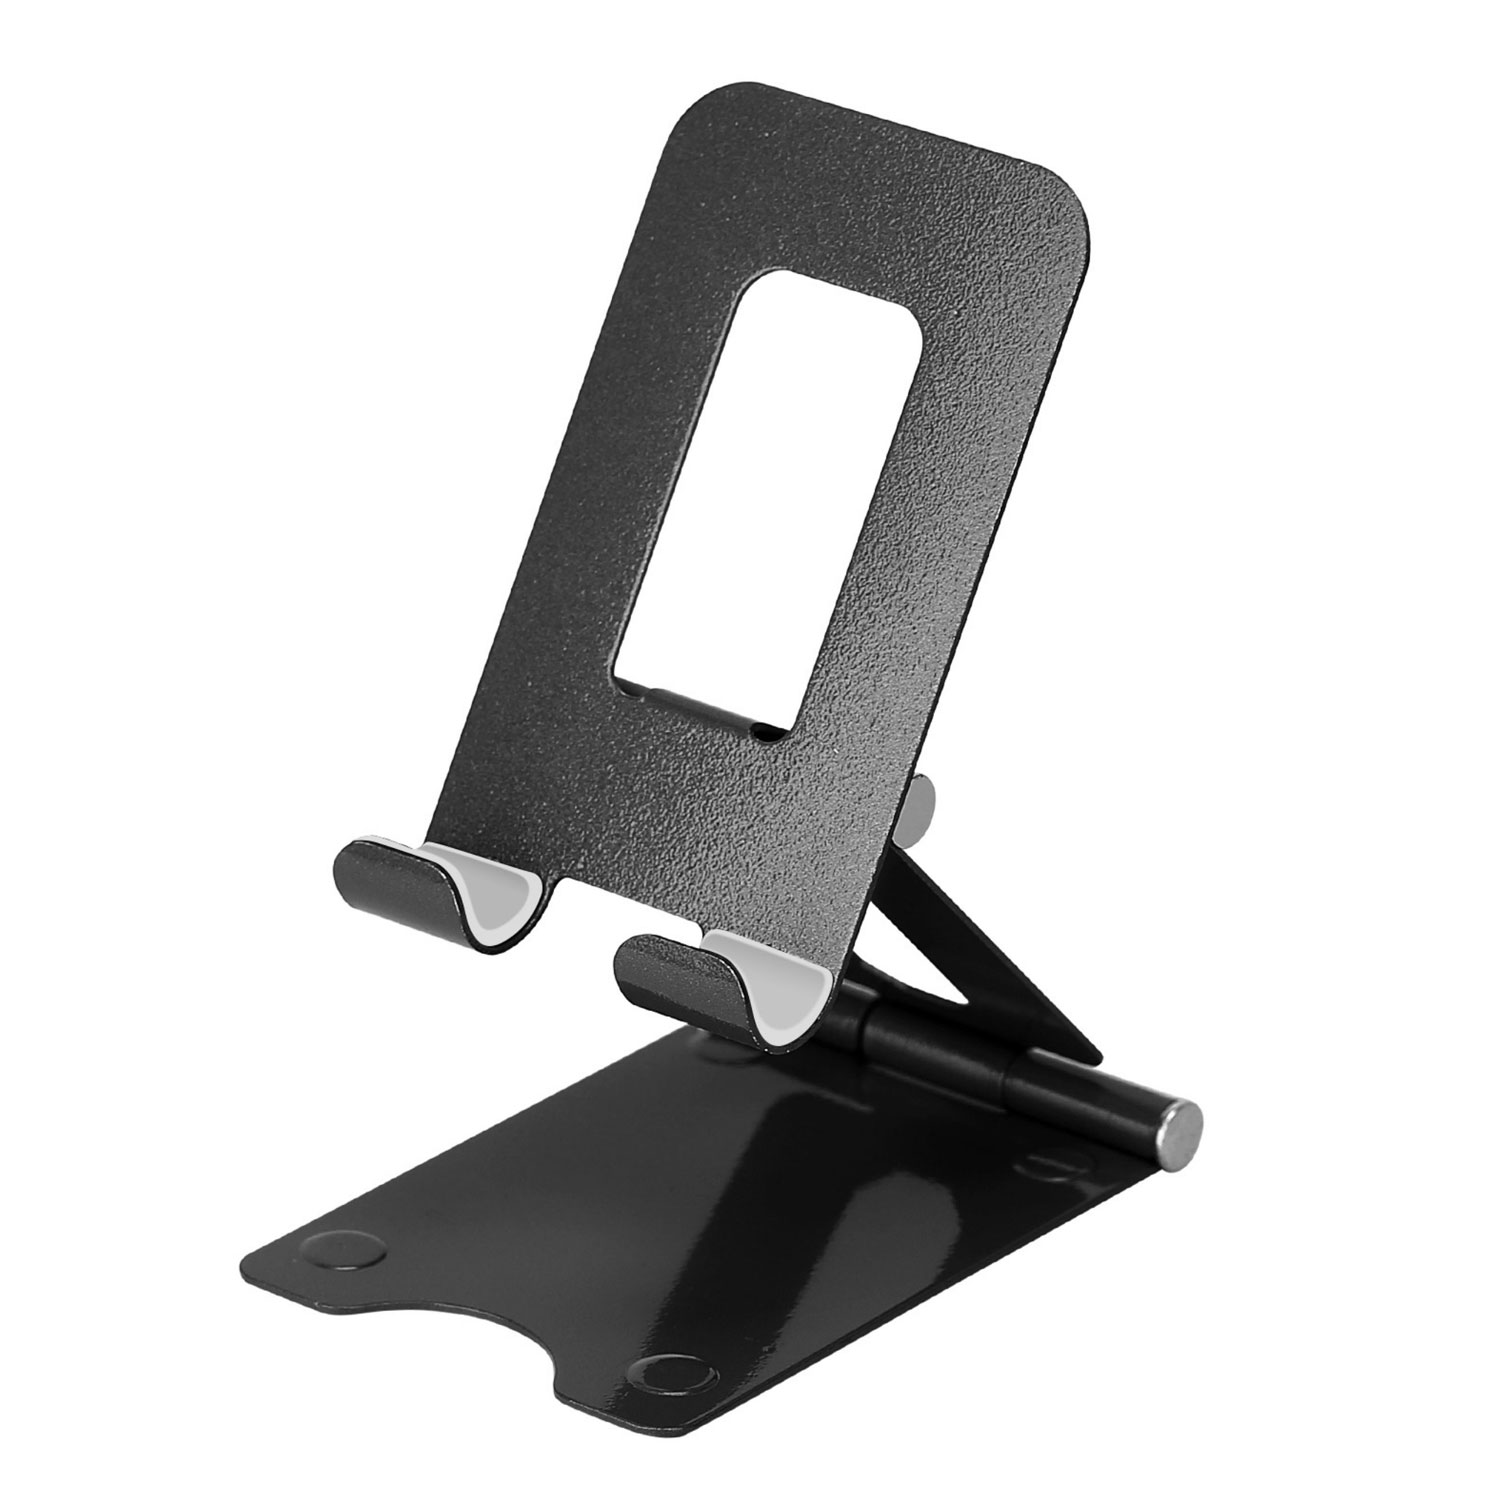 Adjustable Foldable Desktop Phone Stand for 4-10in Devices